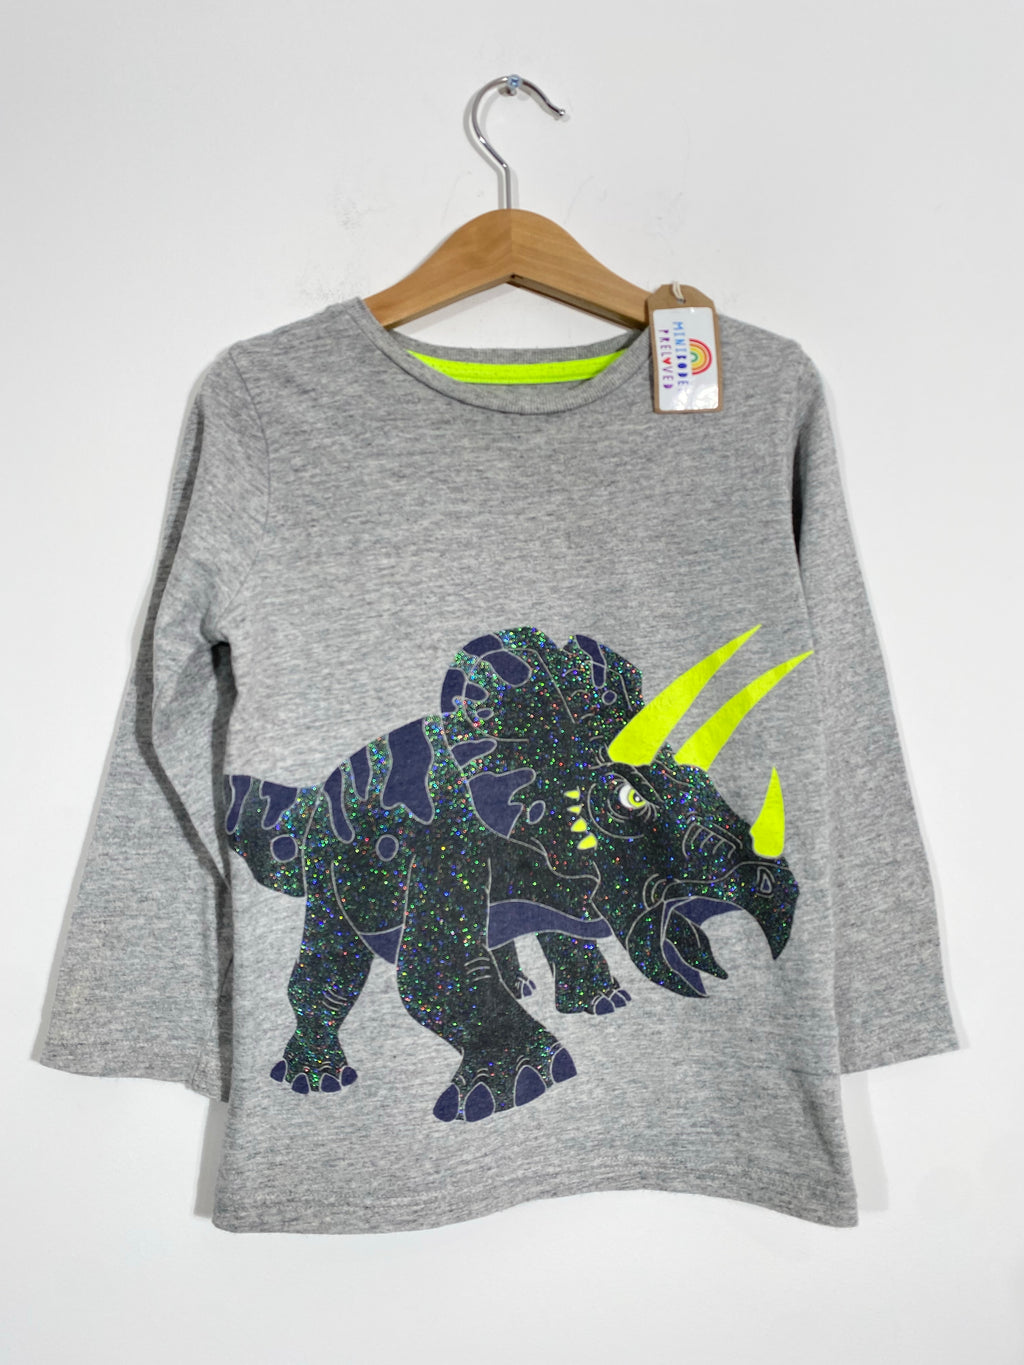 Sparkly Dino Design Grey Top (5-6 Years)